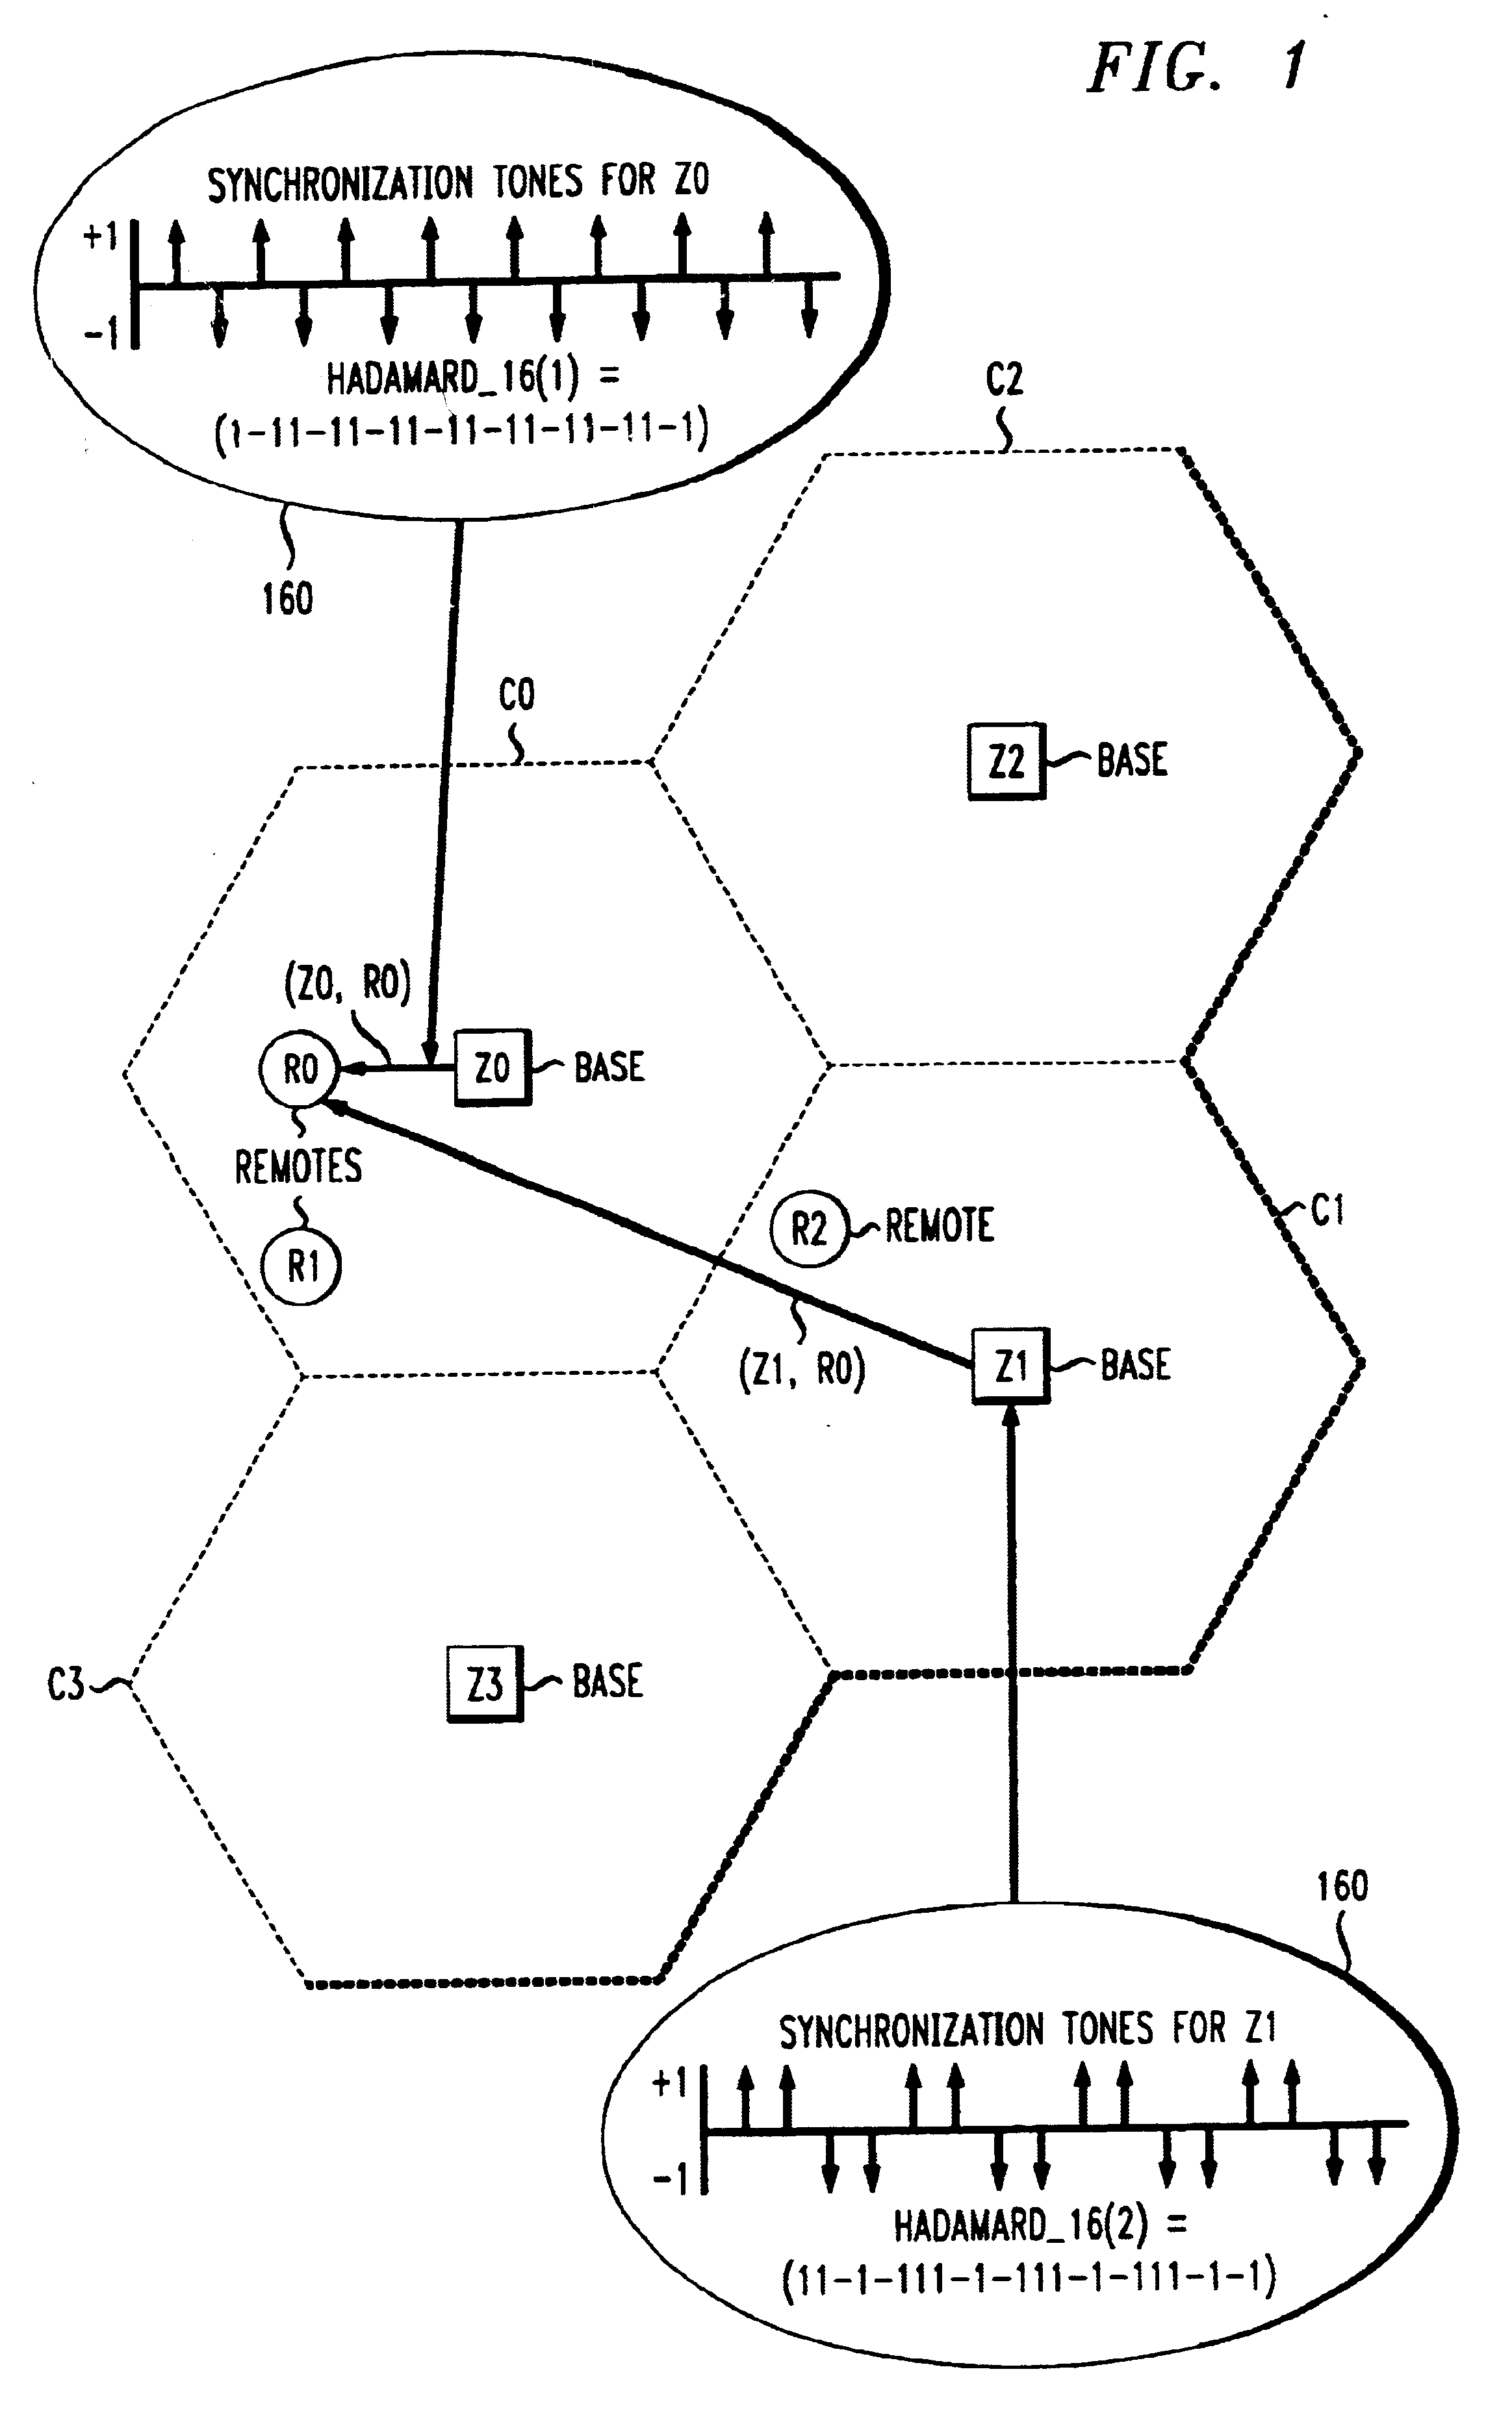 Synchronization preamble method for OFDM waveforms in a communications system